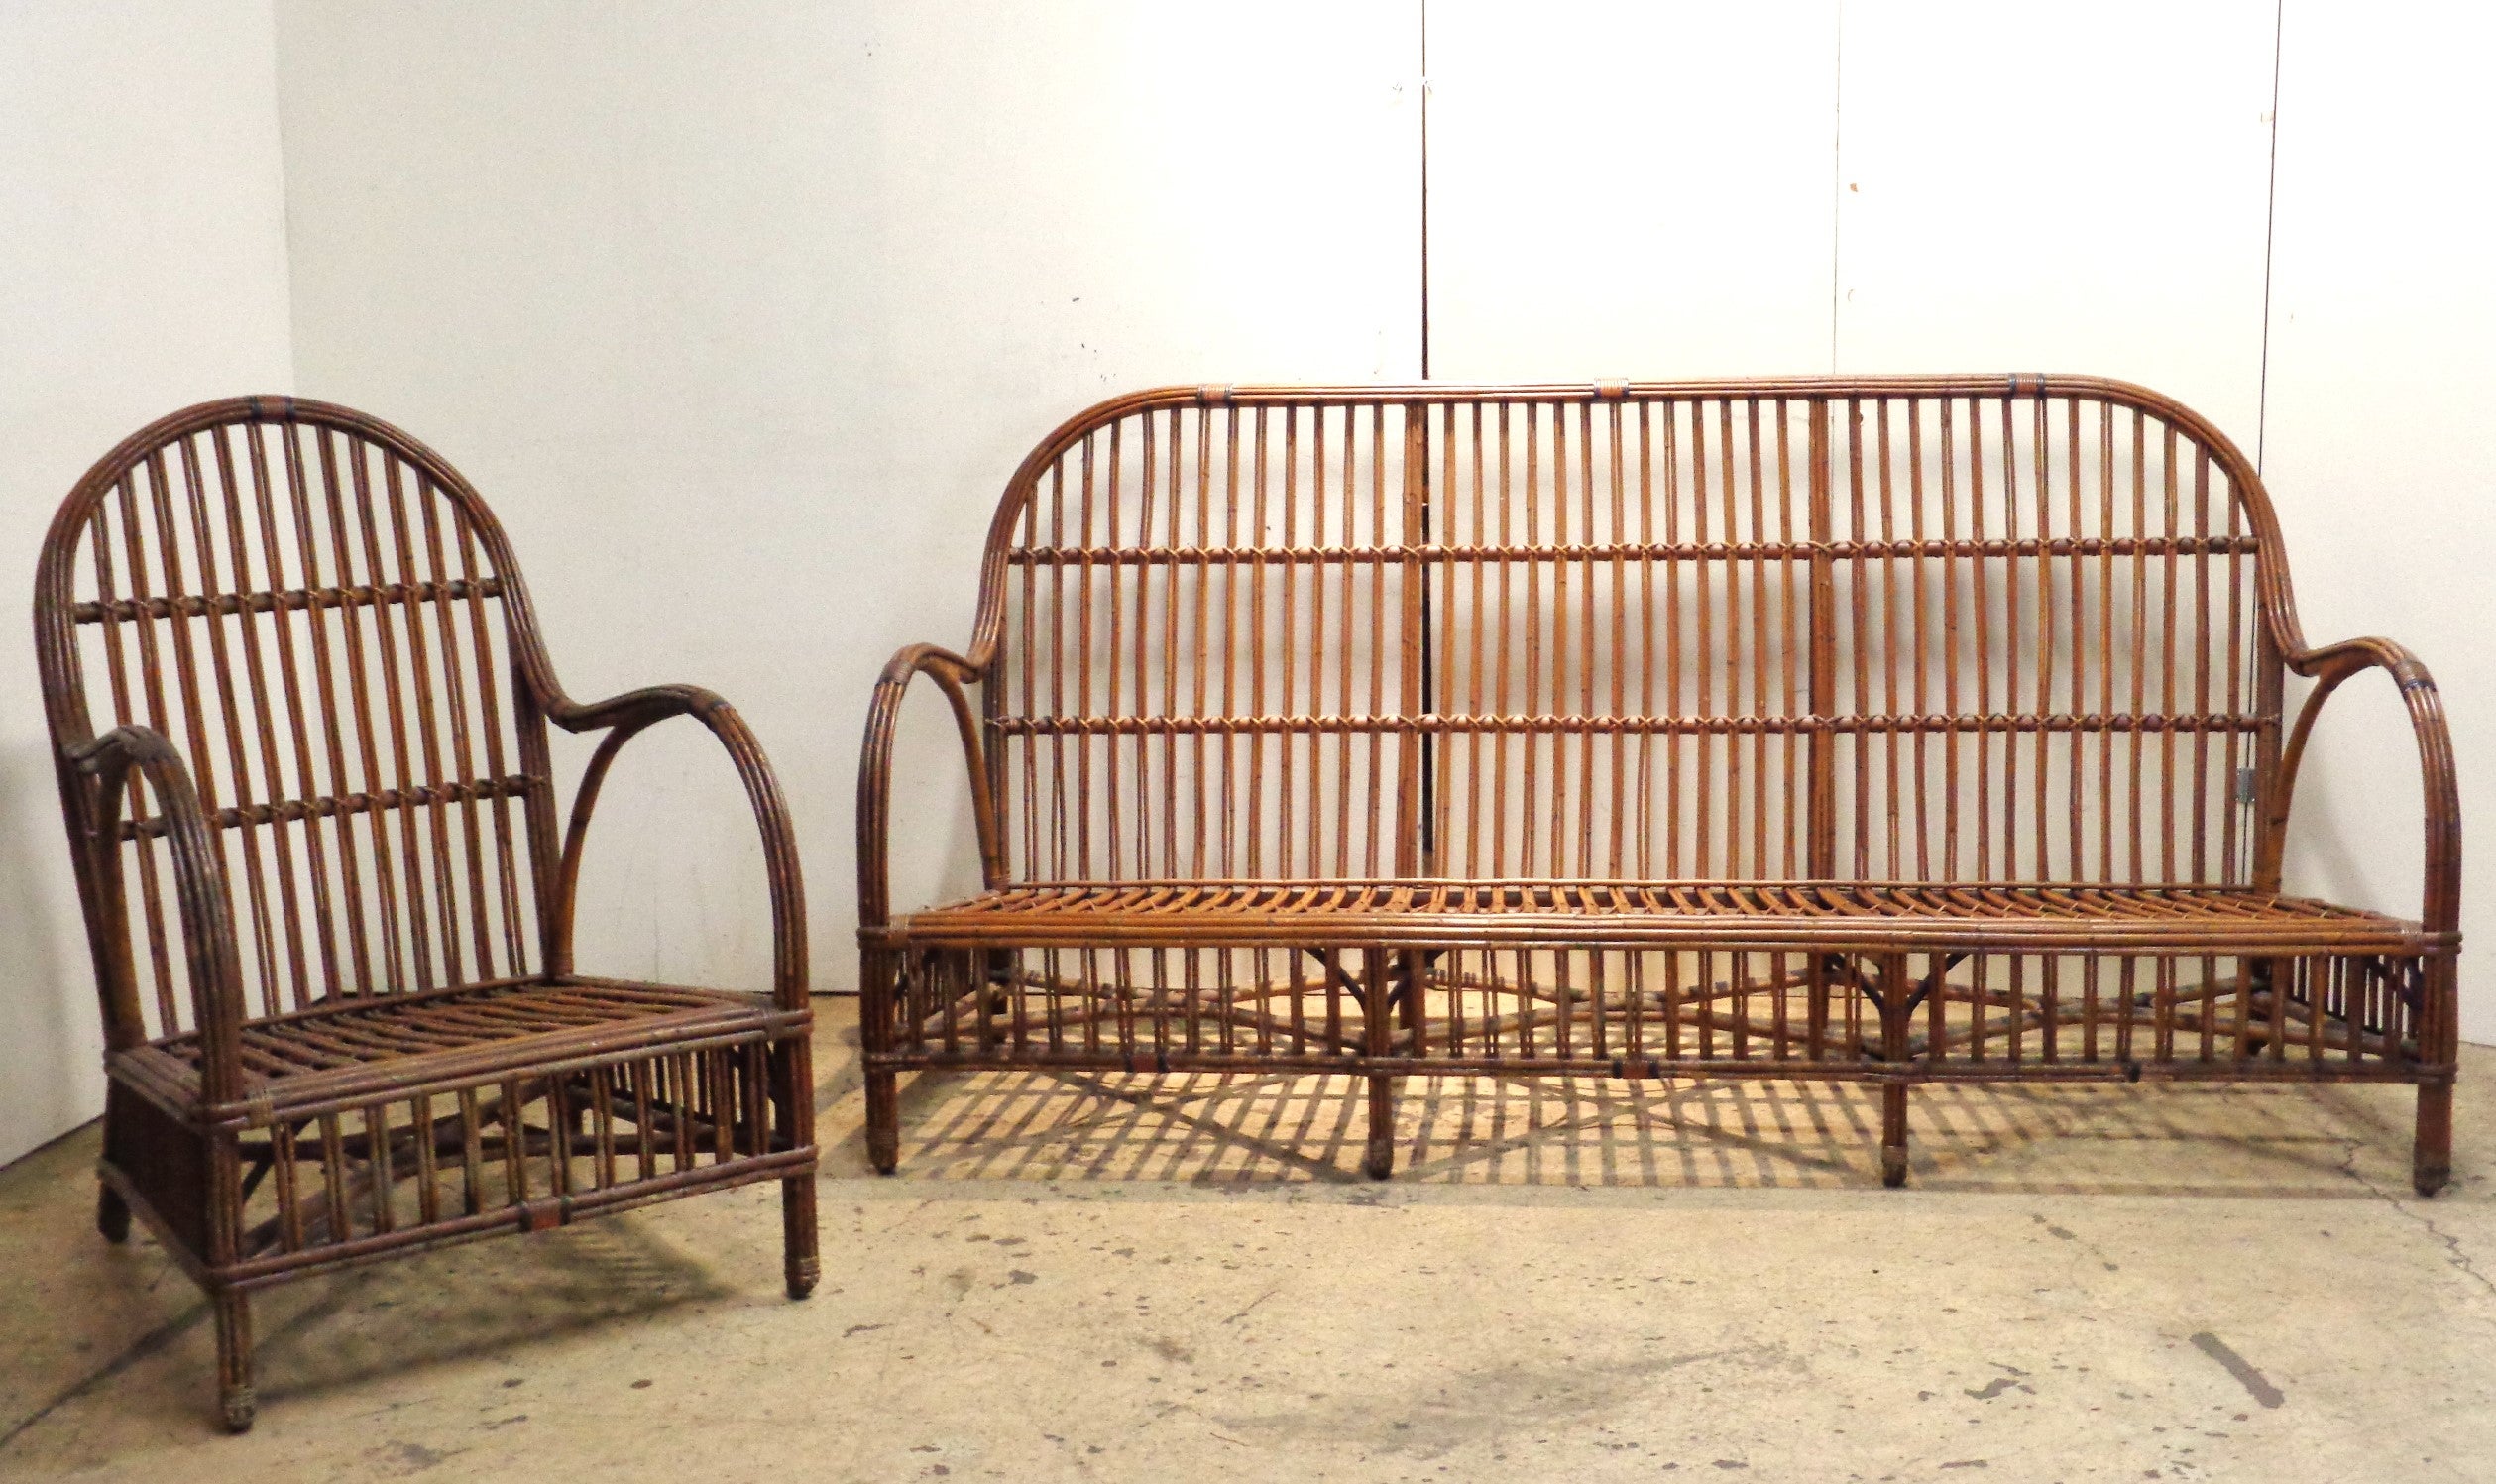 Antique American stick wicker rattan settee w/ matching armchair in beautifully aged original rich natural finish. Great looking set w/ exceptionally fine quality construction. Circa 1930. Settee measures 72 1/2